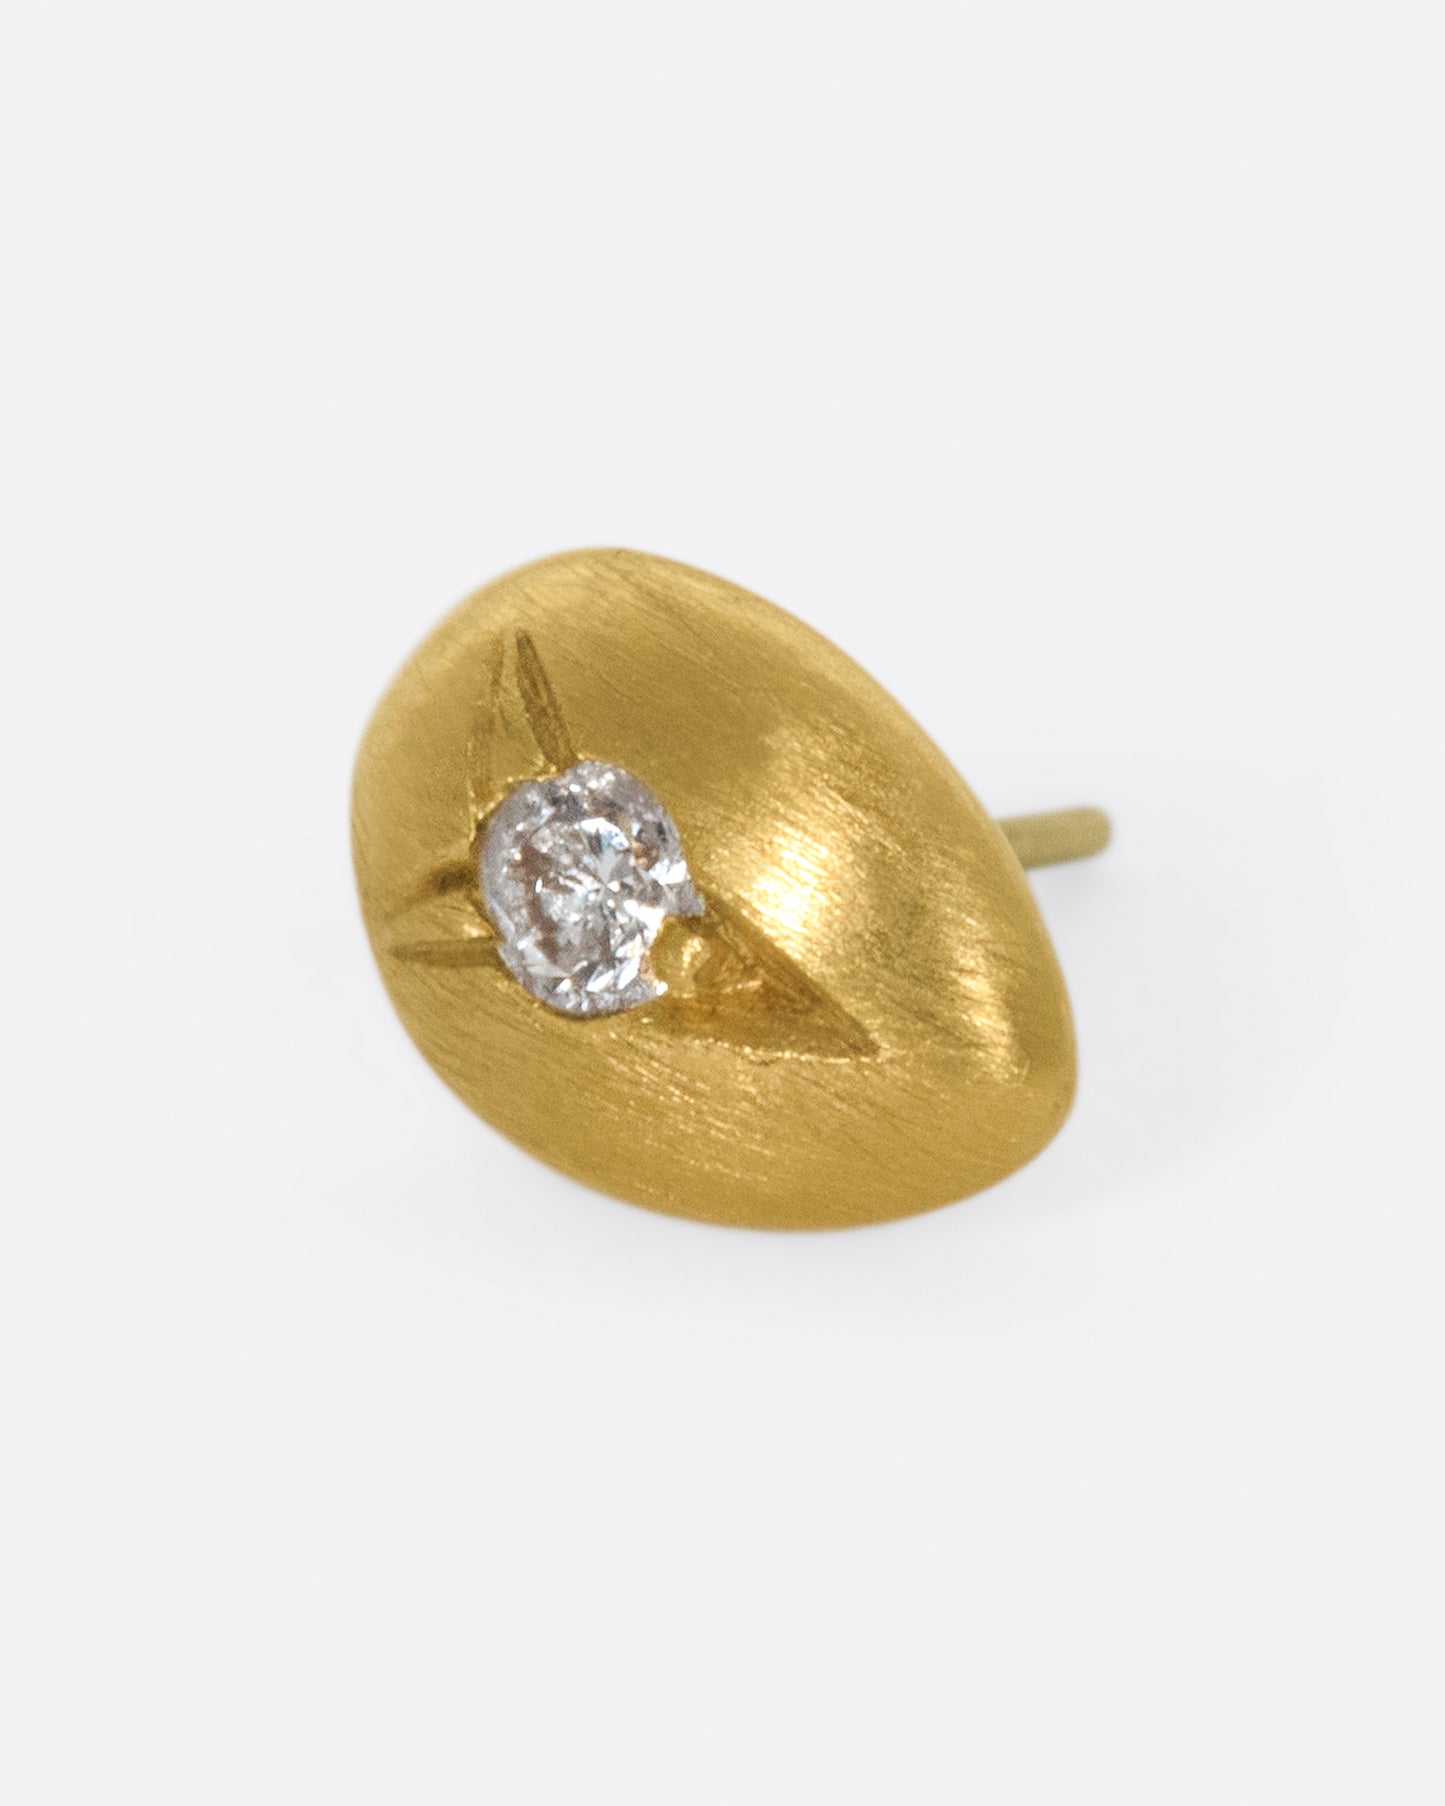 This brushed gold earring is smooth and rounded like a real drop of water.